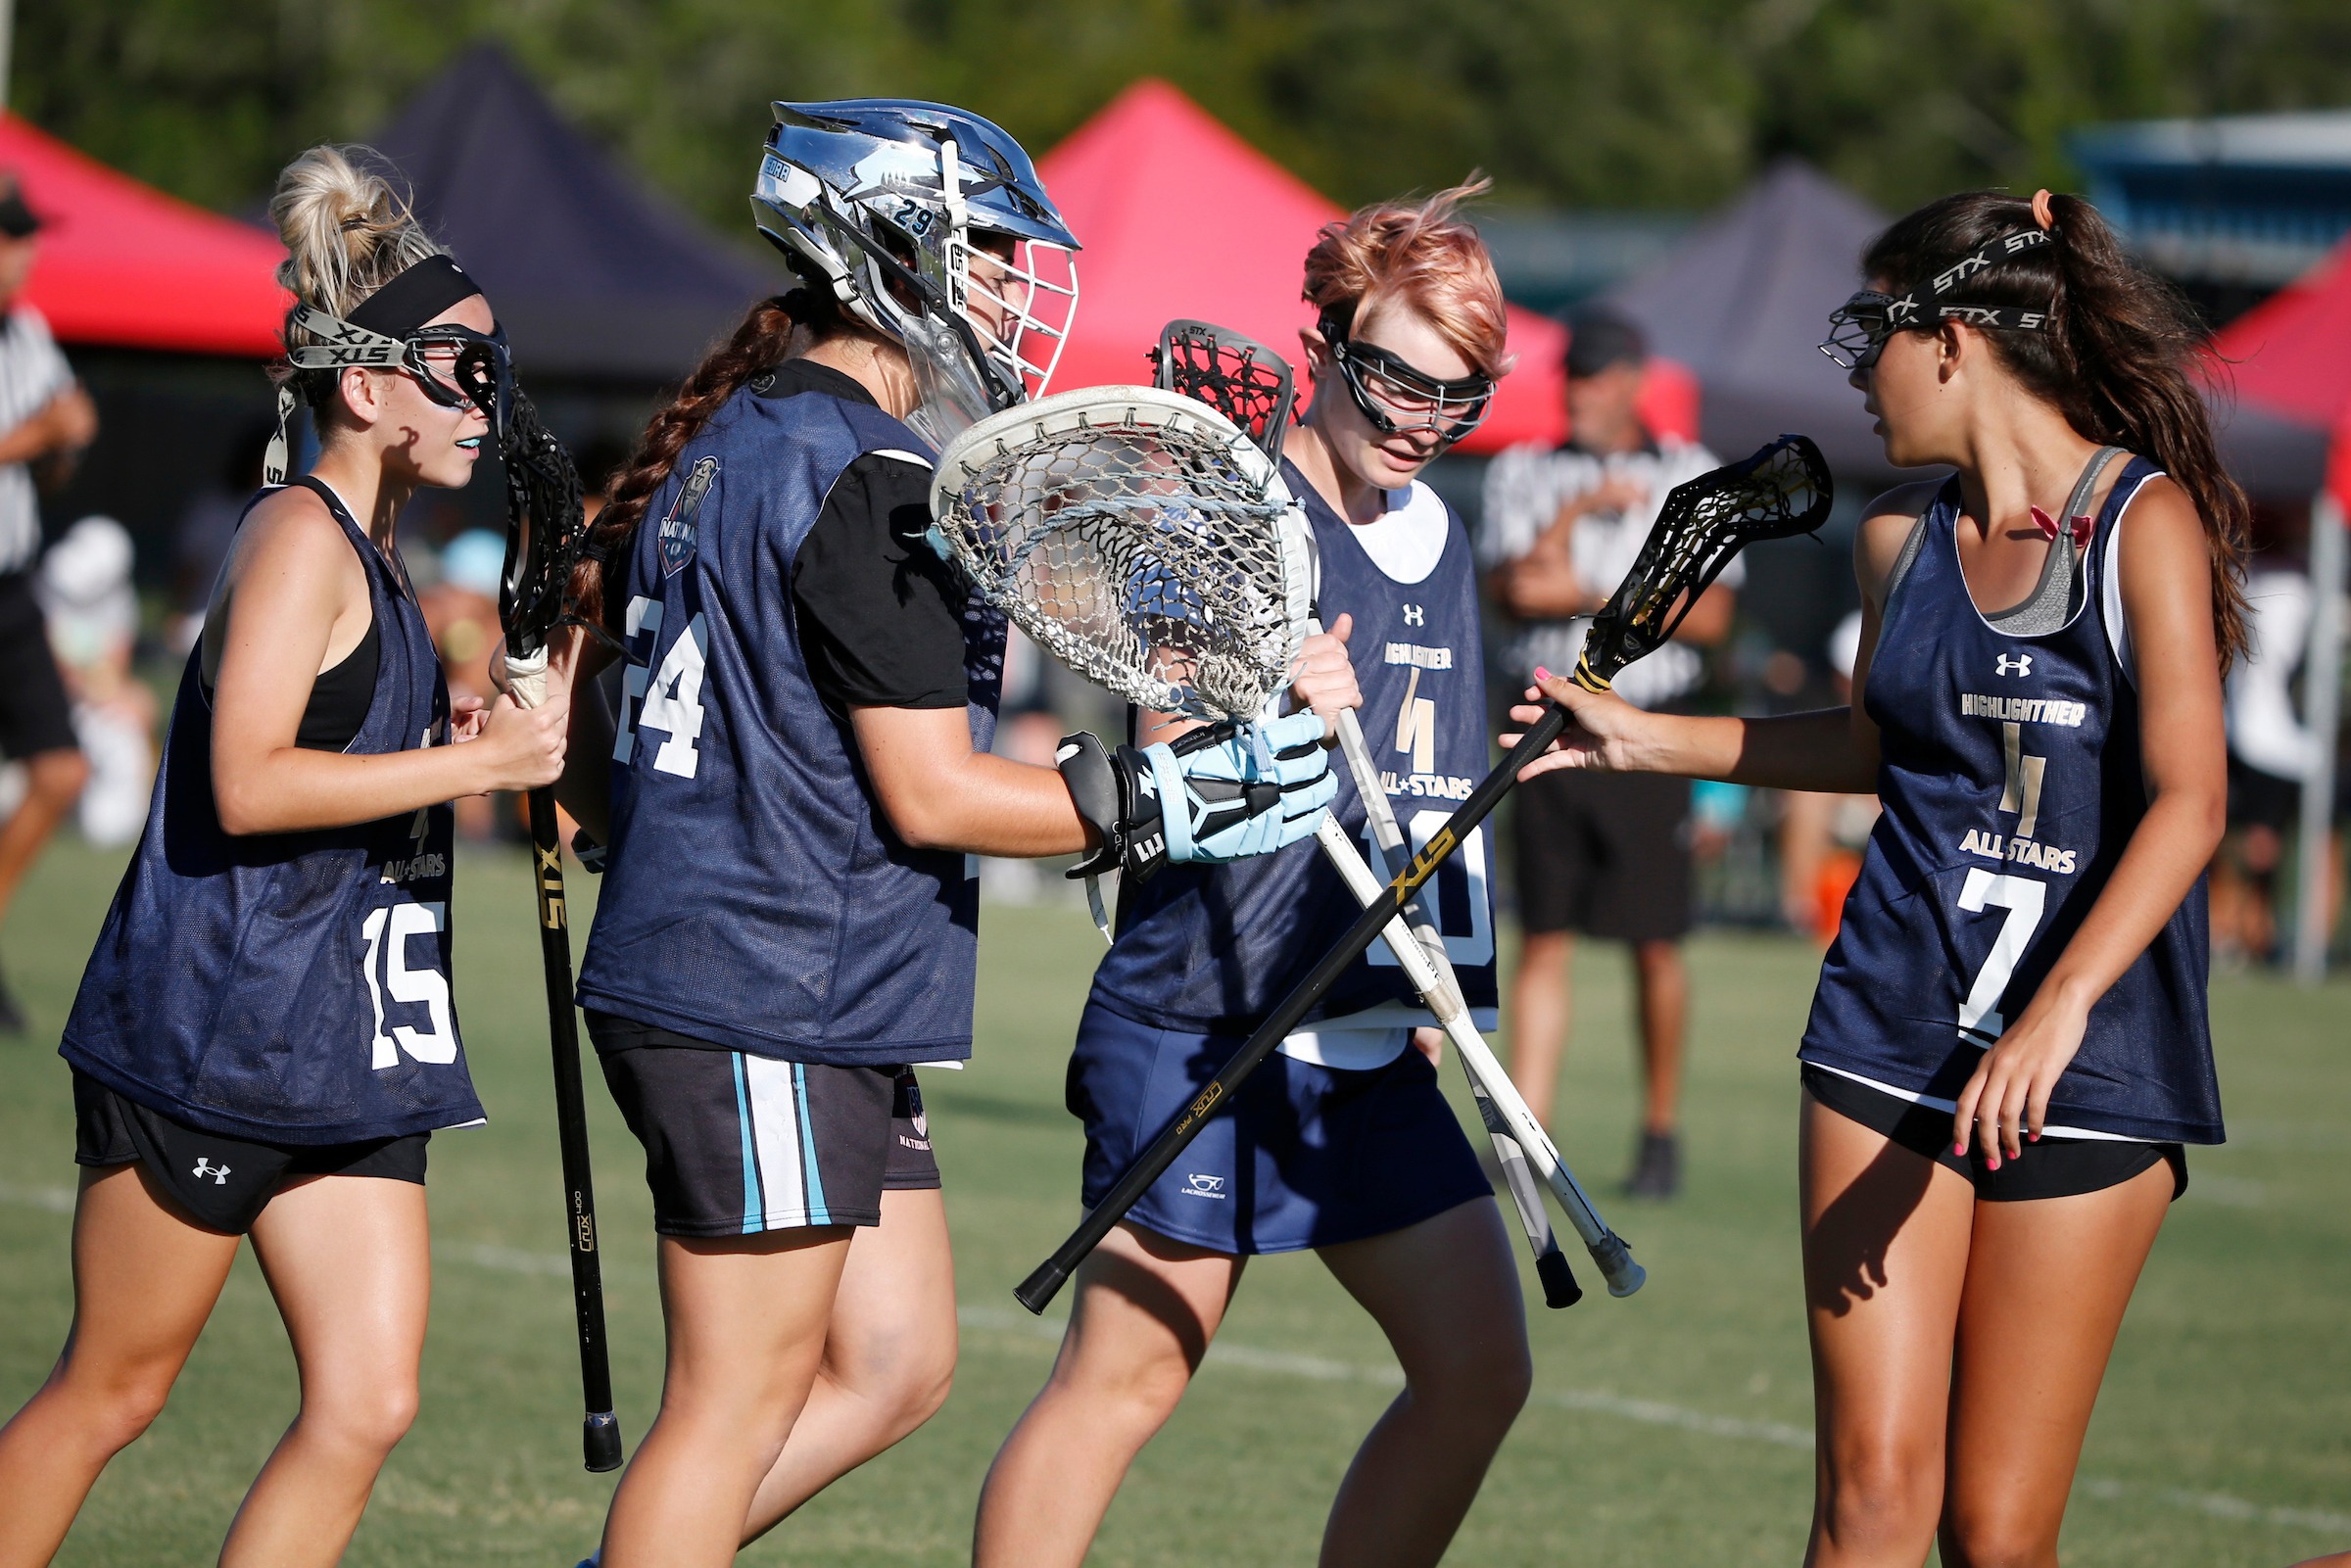 National All Star Games – National Lacrosse Recruiting Event